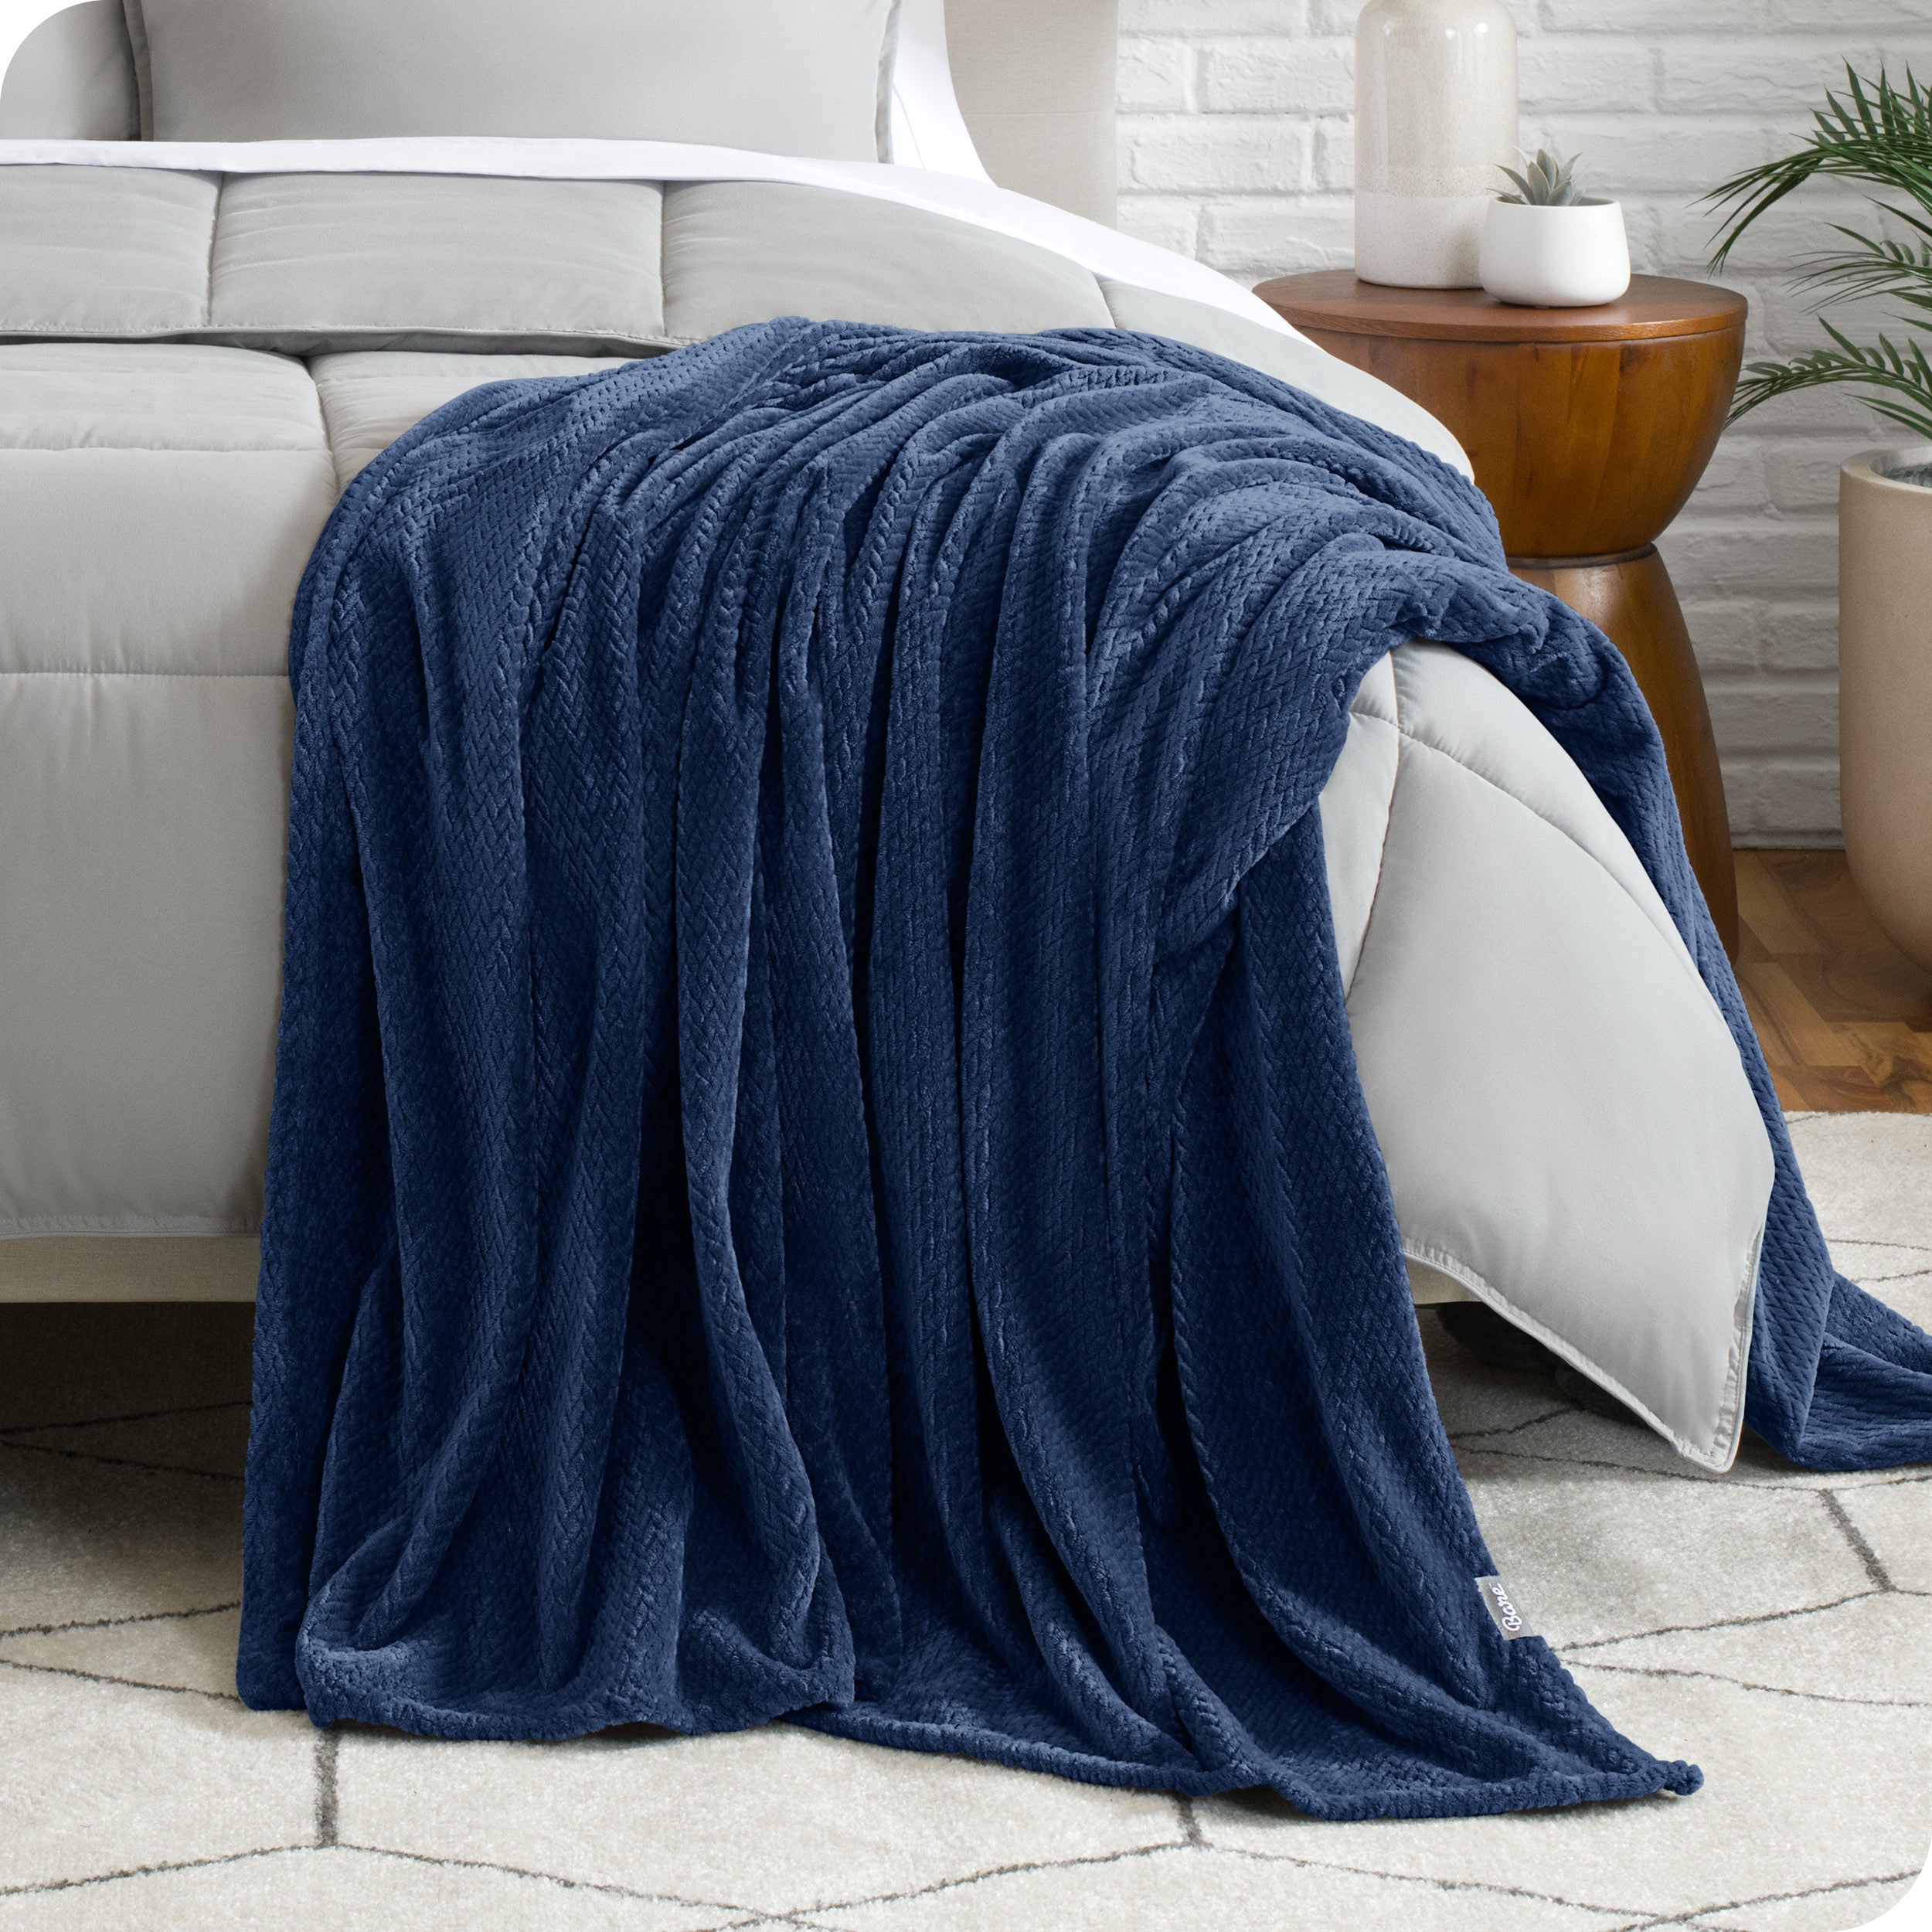 A microplush blanket is draped over the side and bottom of a neatly made bed.